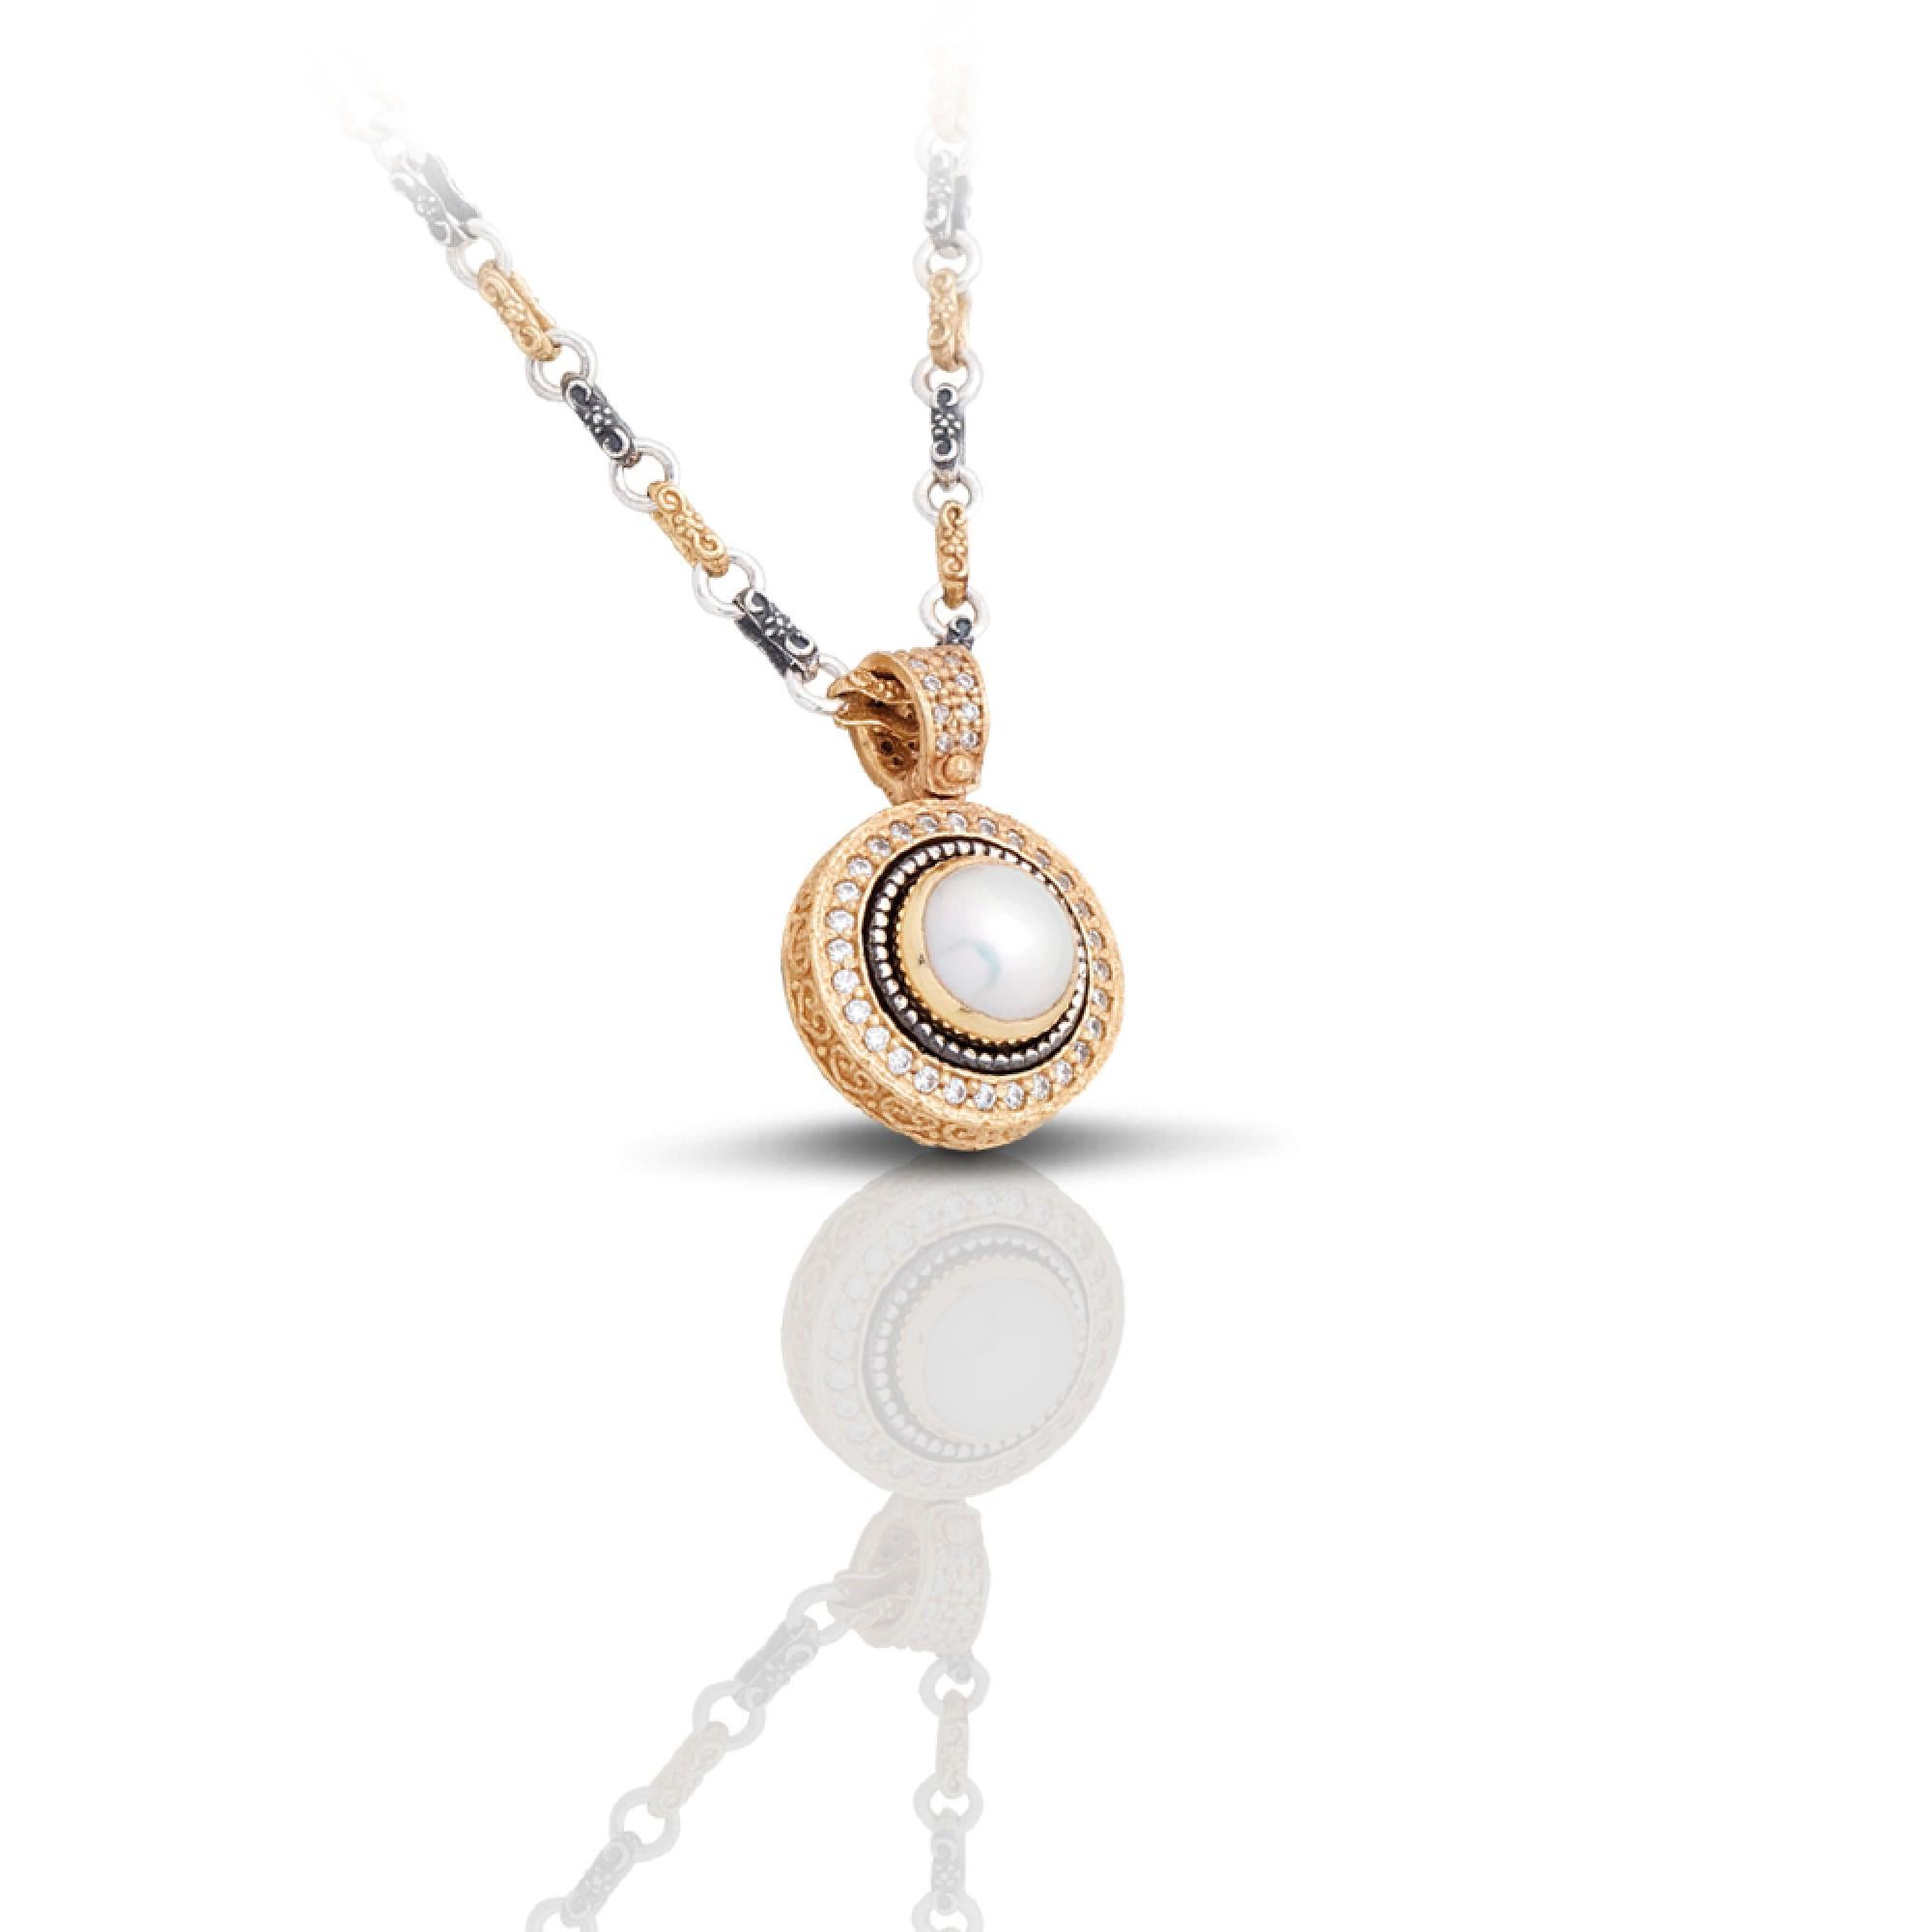 The ancient origin of the word pearl, which has been attributed to this beautiful organic matter, justifies both the historical charm that this jewel has exerted on man and its direct connection with various healing properties.

In ancient Greece,